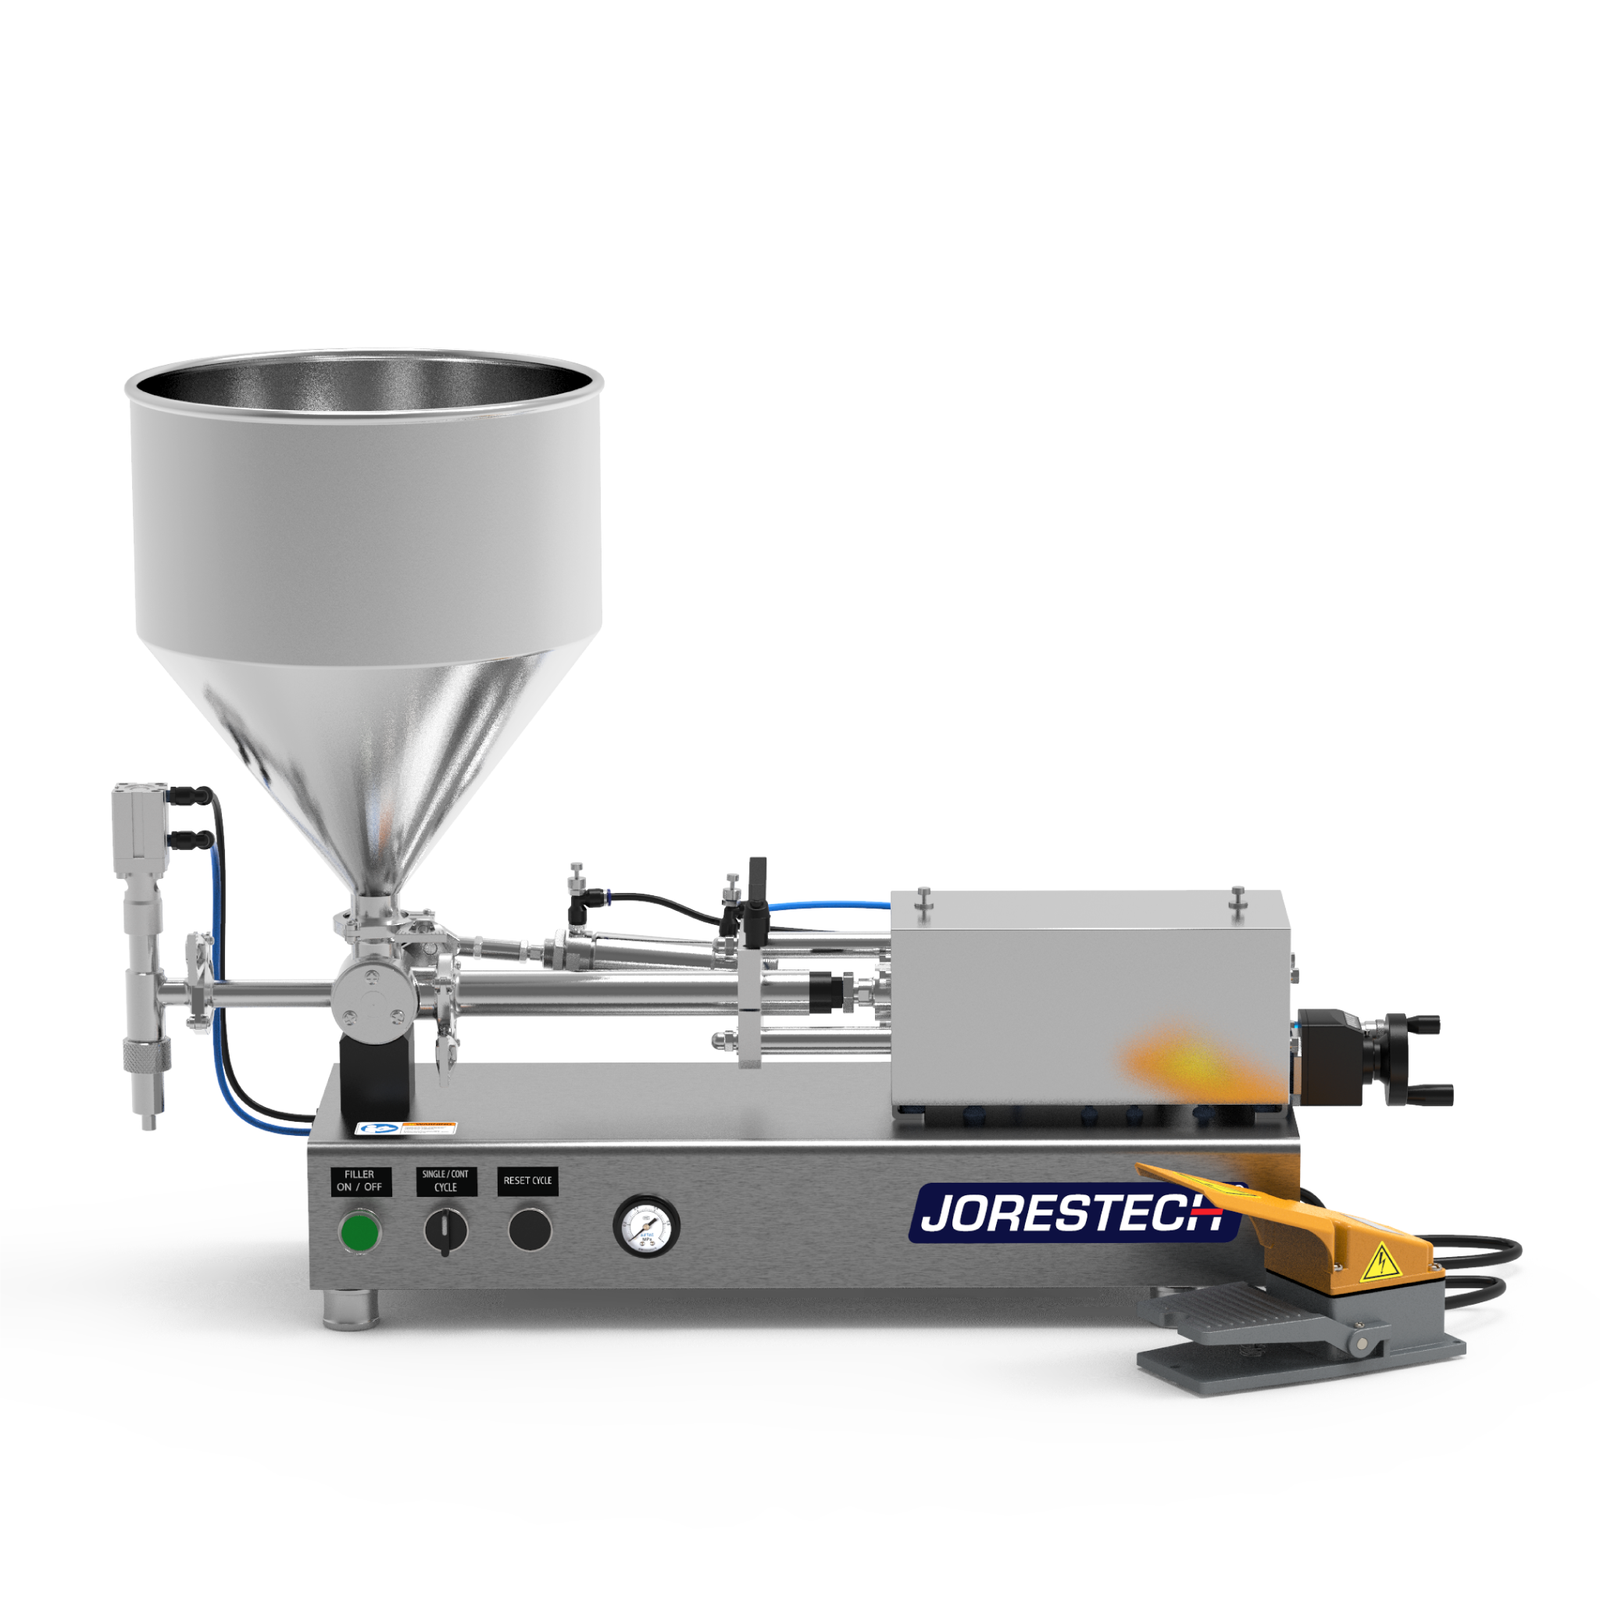 High viscosity tabletop paste piston filling machine . The piston filler is made out of stainless steel and there's a yellow and grey foot pedal resting on the side.